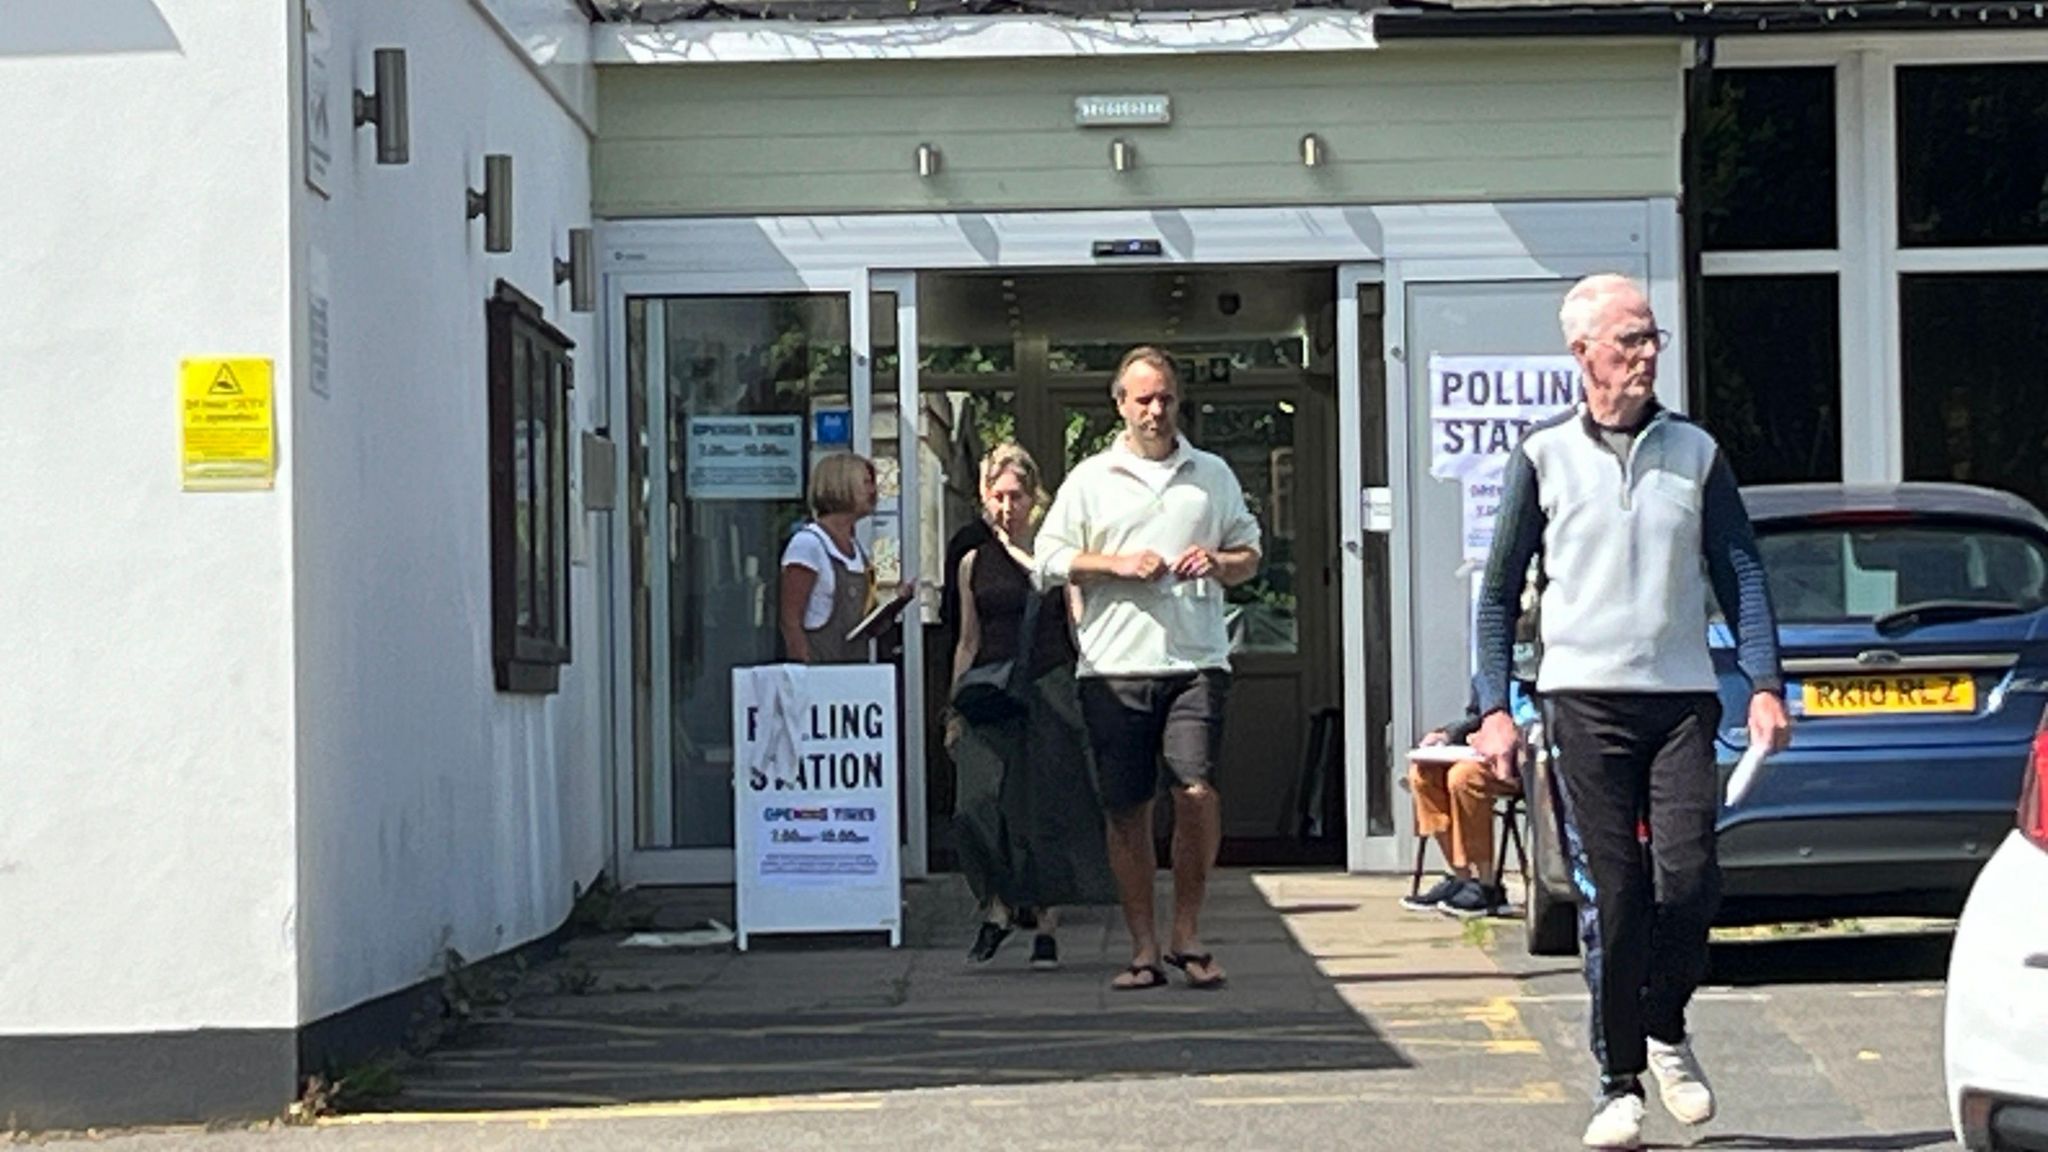 Voters leaving Claygate village hall polling station on Thursday morning